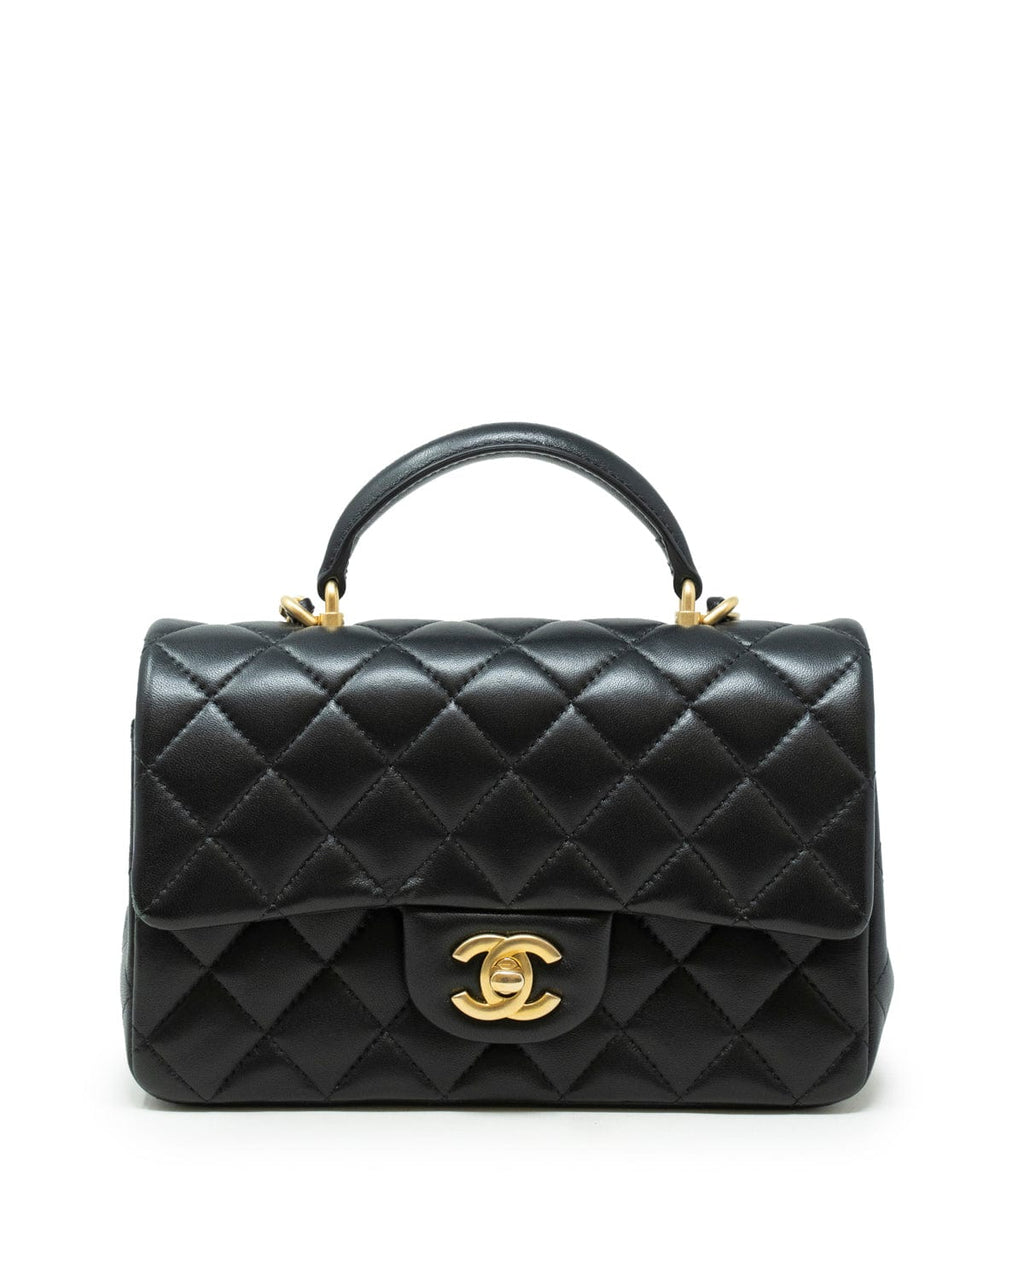 Chanel Black Quilted Flap Bag with Top Handle  BagButler